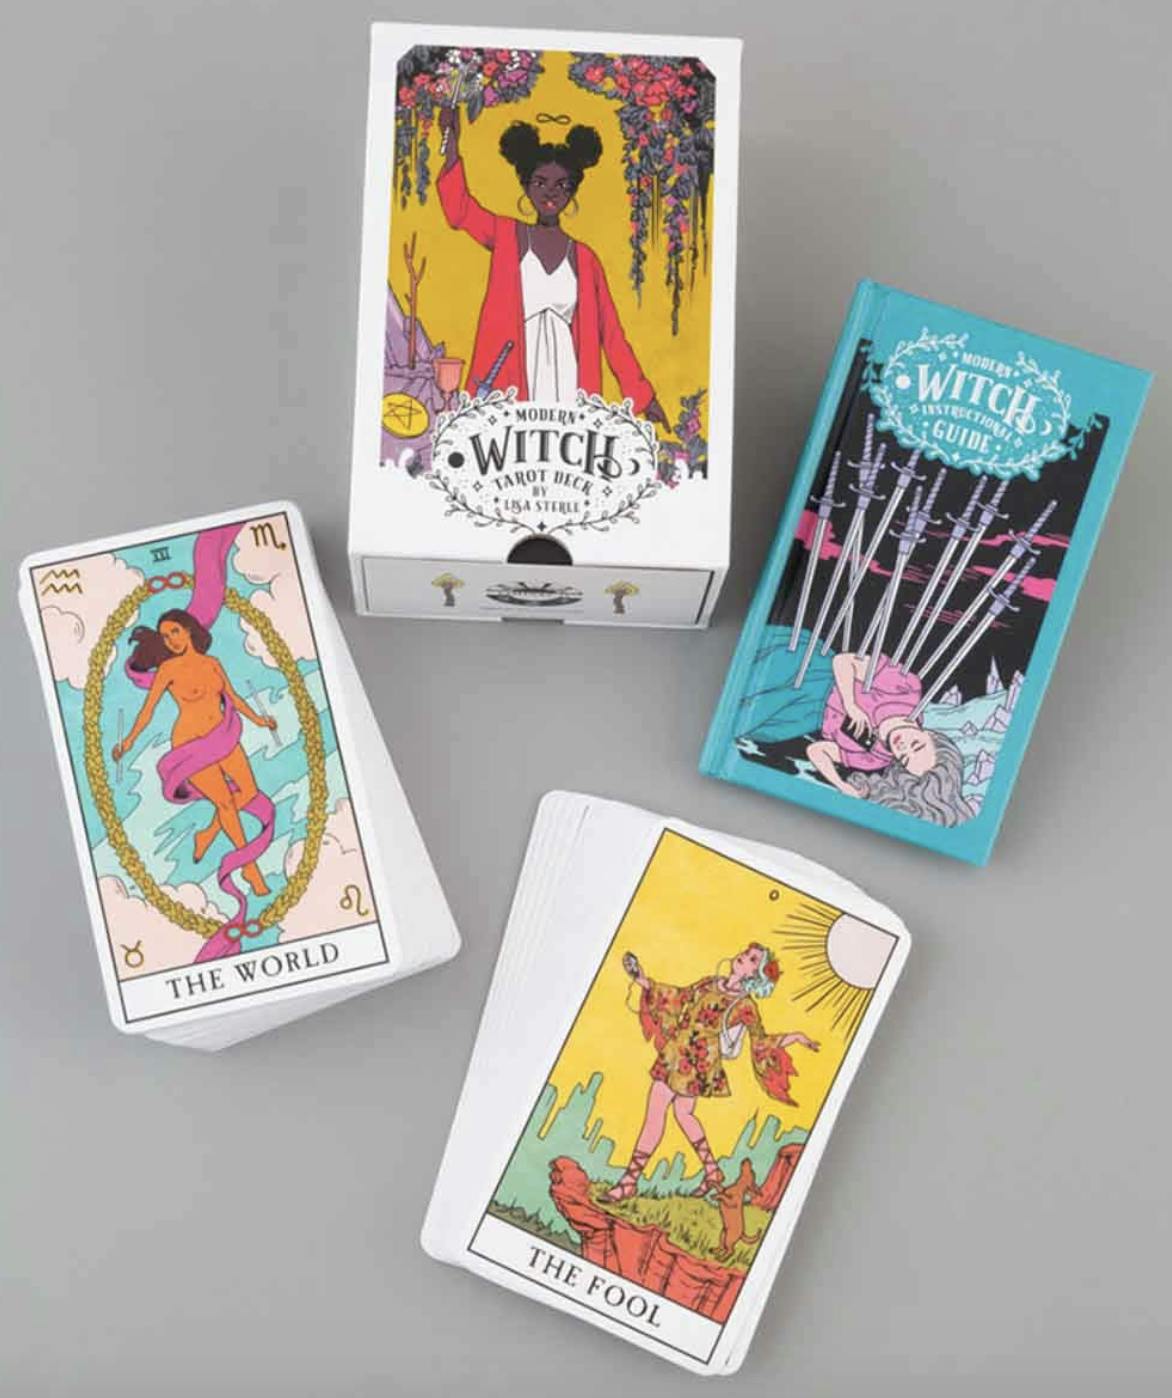 Modern Witch tarot card deck and the manual on a grey background.